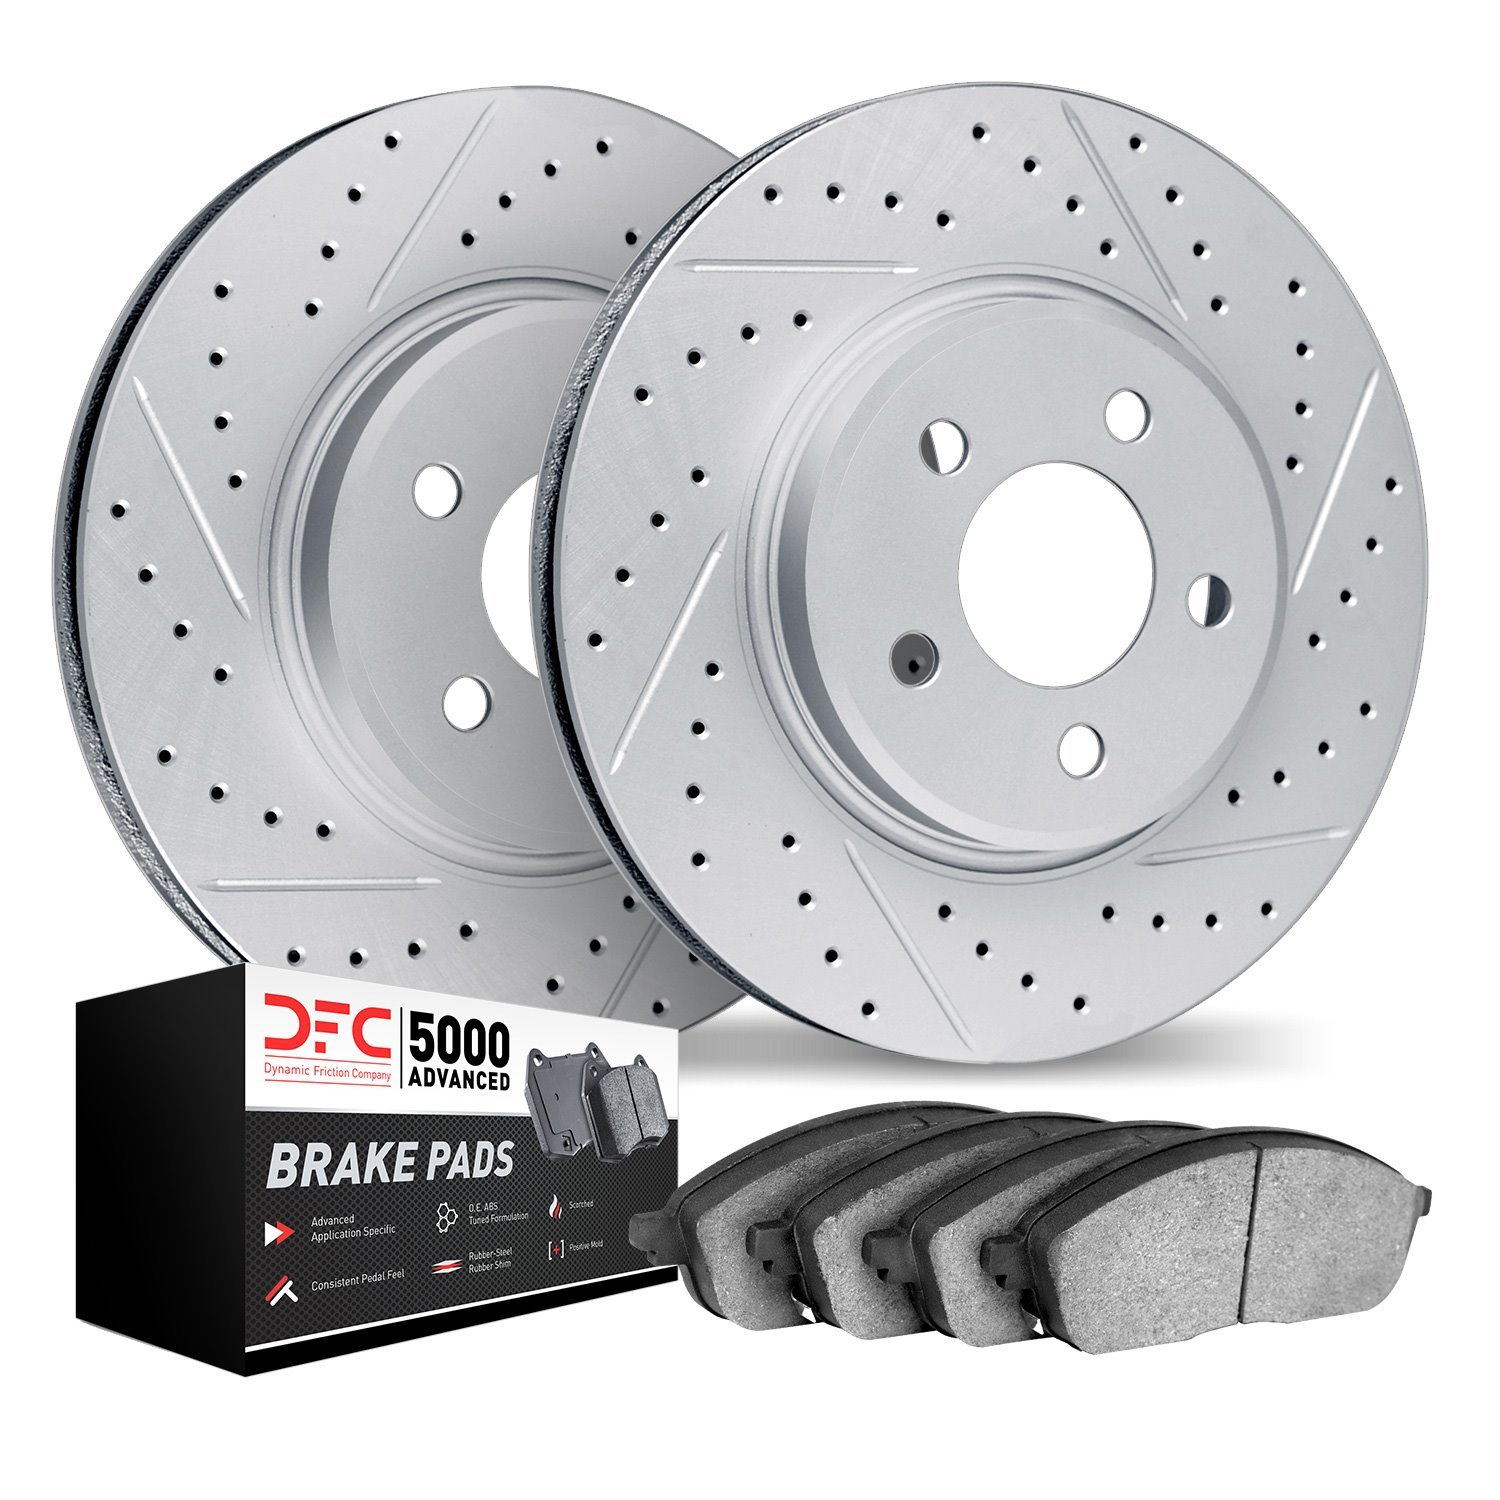 2502-52010 Geoperformance Drilled/Slotted Rotors w/5000 Advanced Brake Pads Kit, 2005-2006 GM, Position: Rear